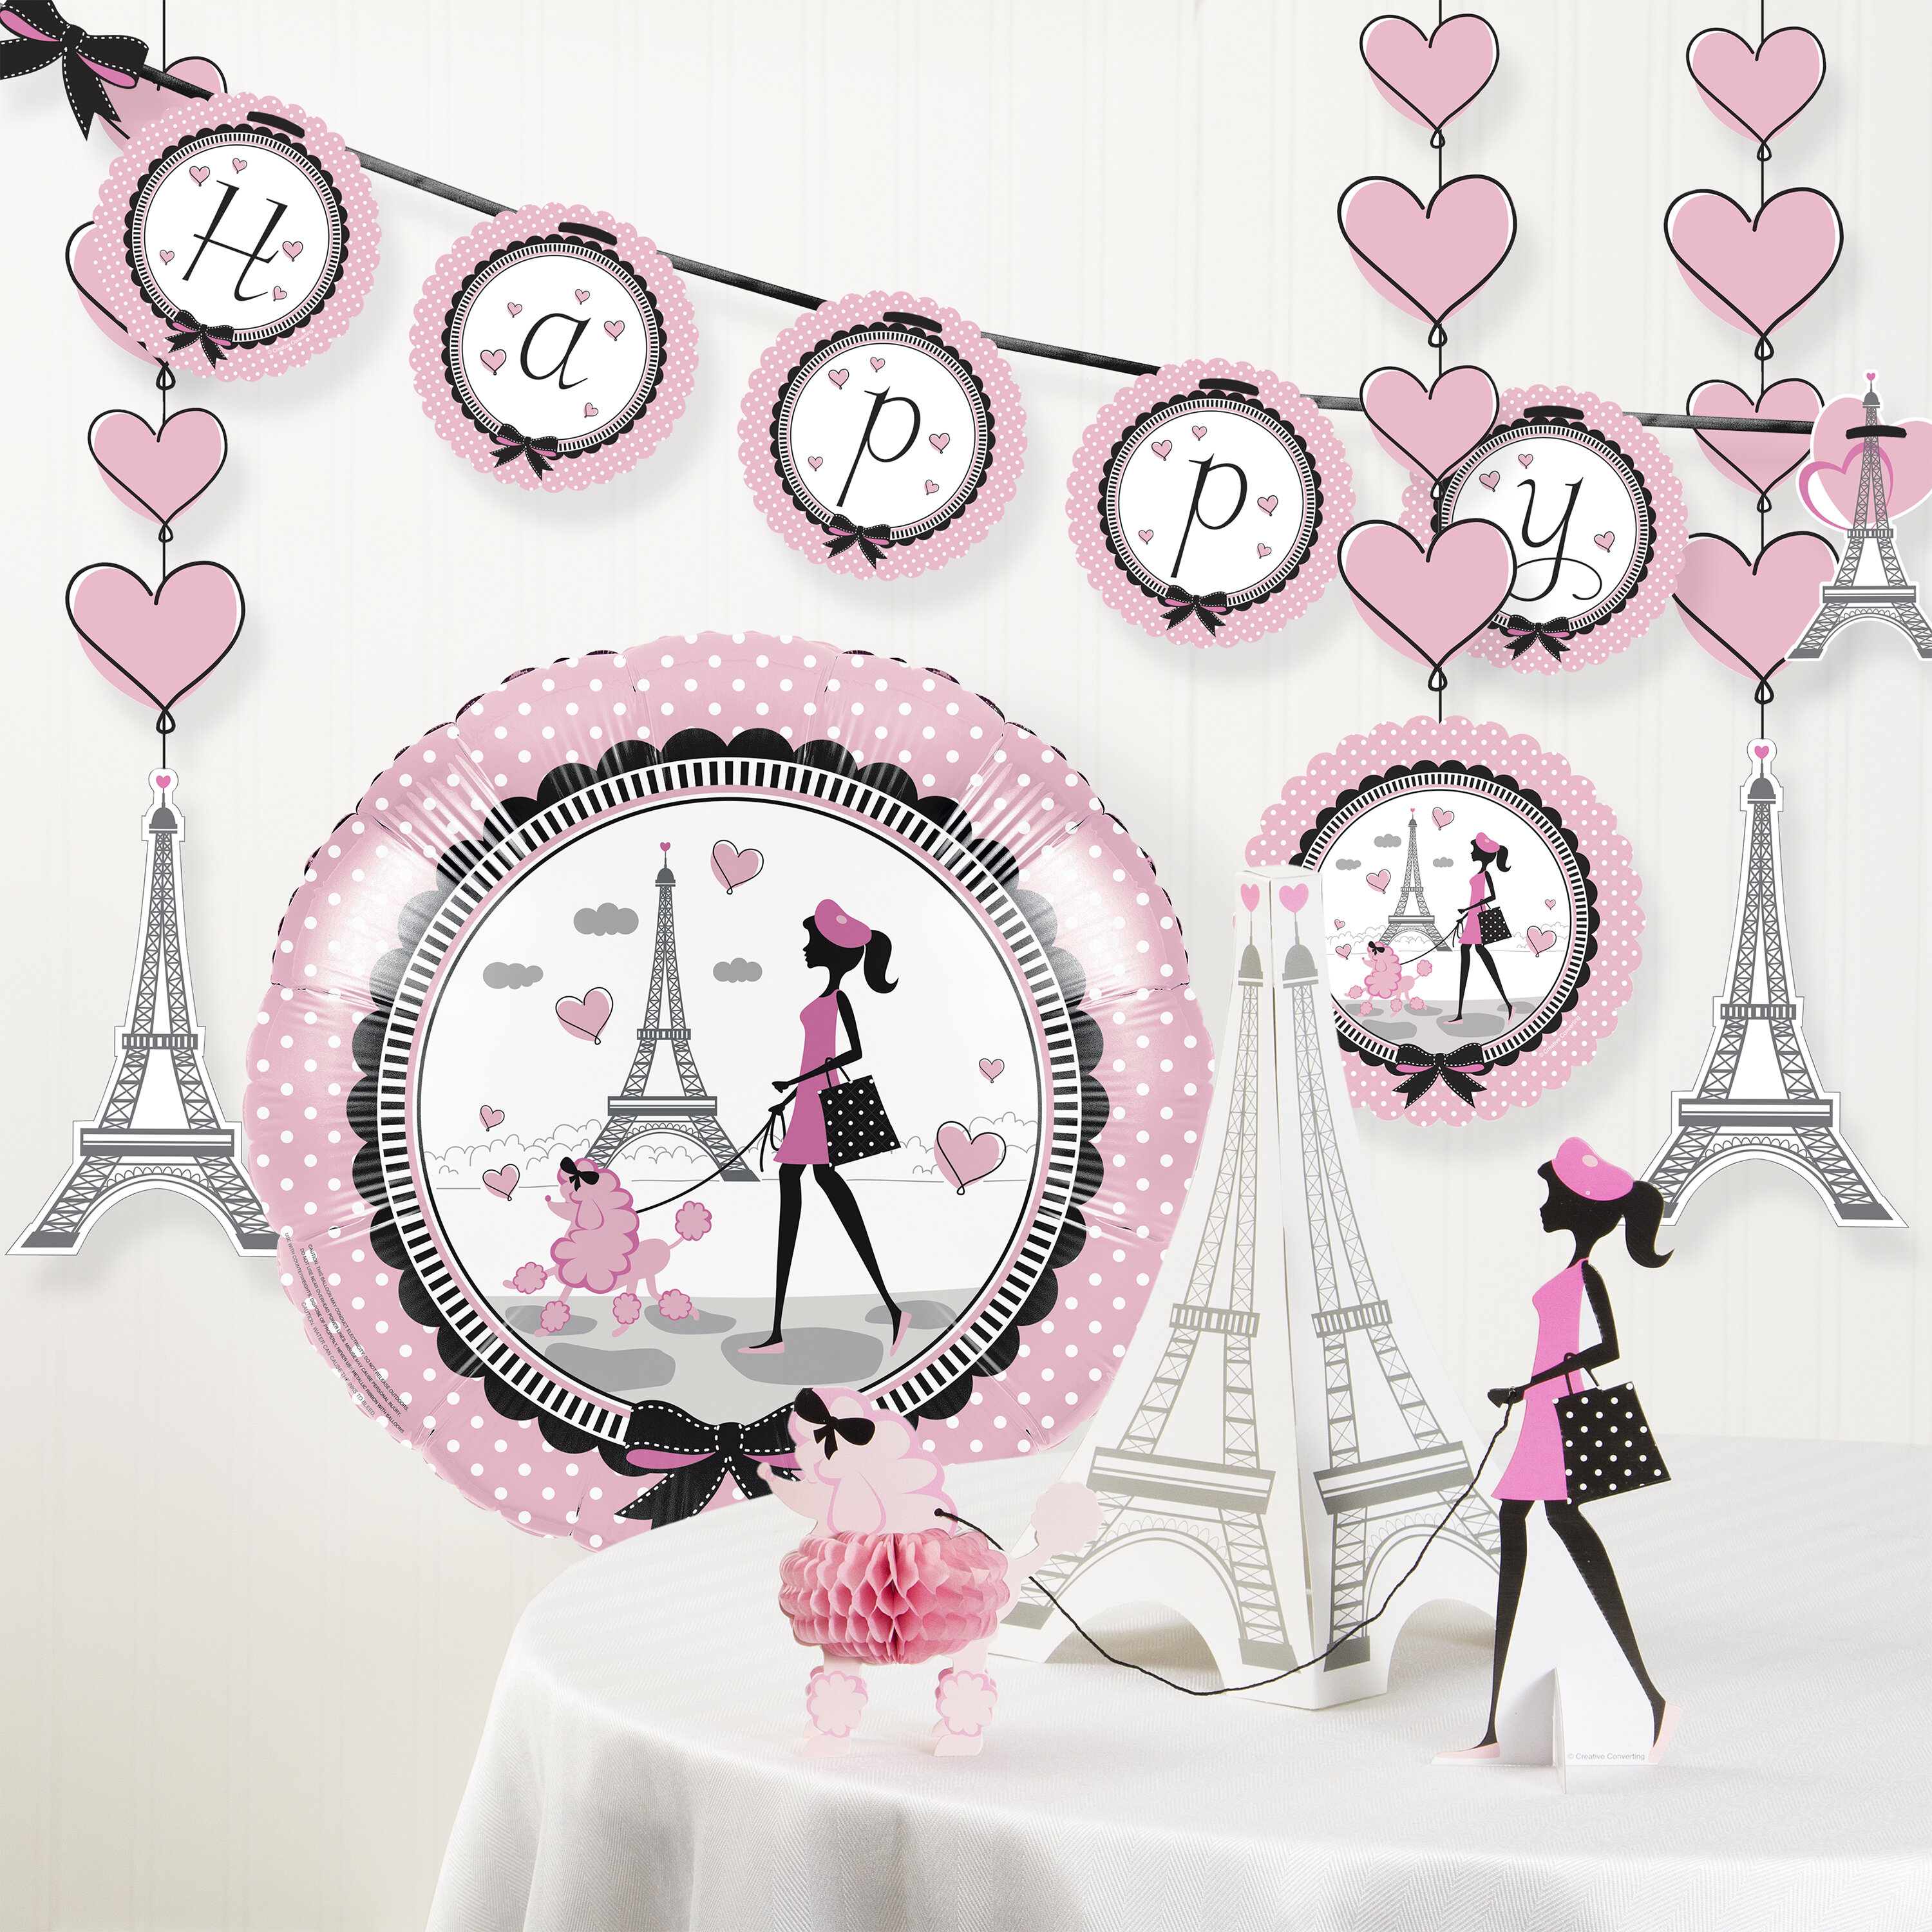 The Party Aisle Party In Paris Birthday Party Decoration Kit